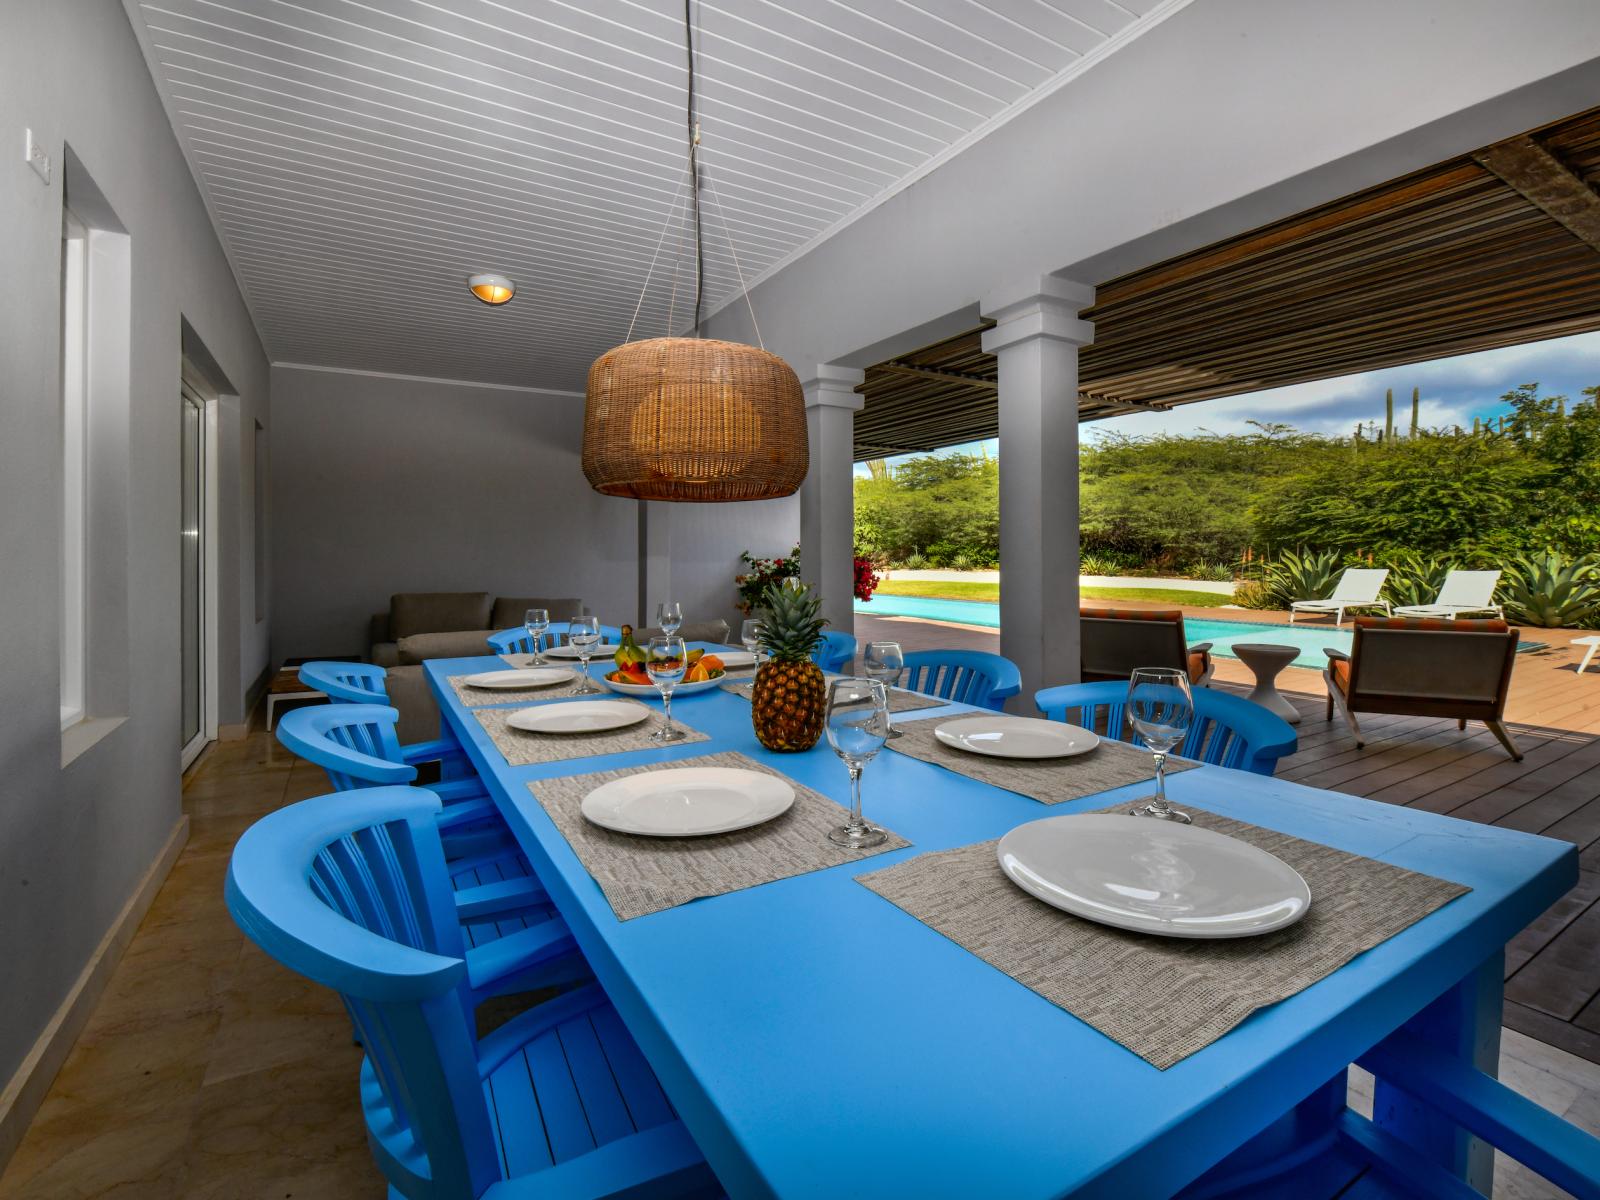 Outside dining table for meals by the pool